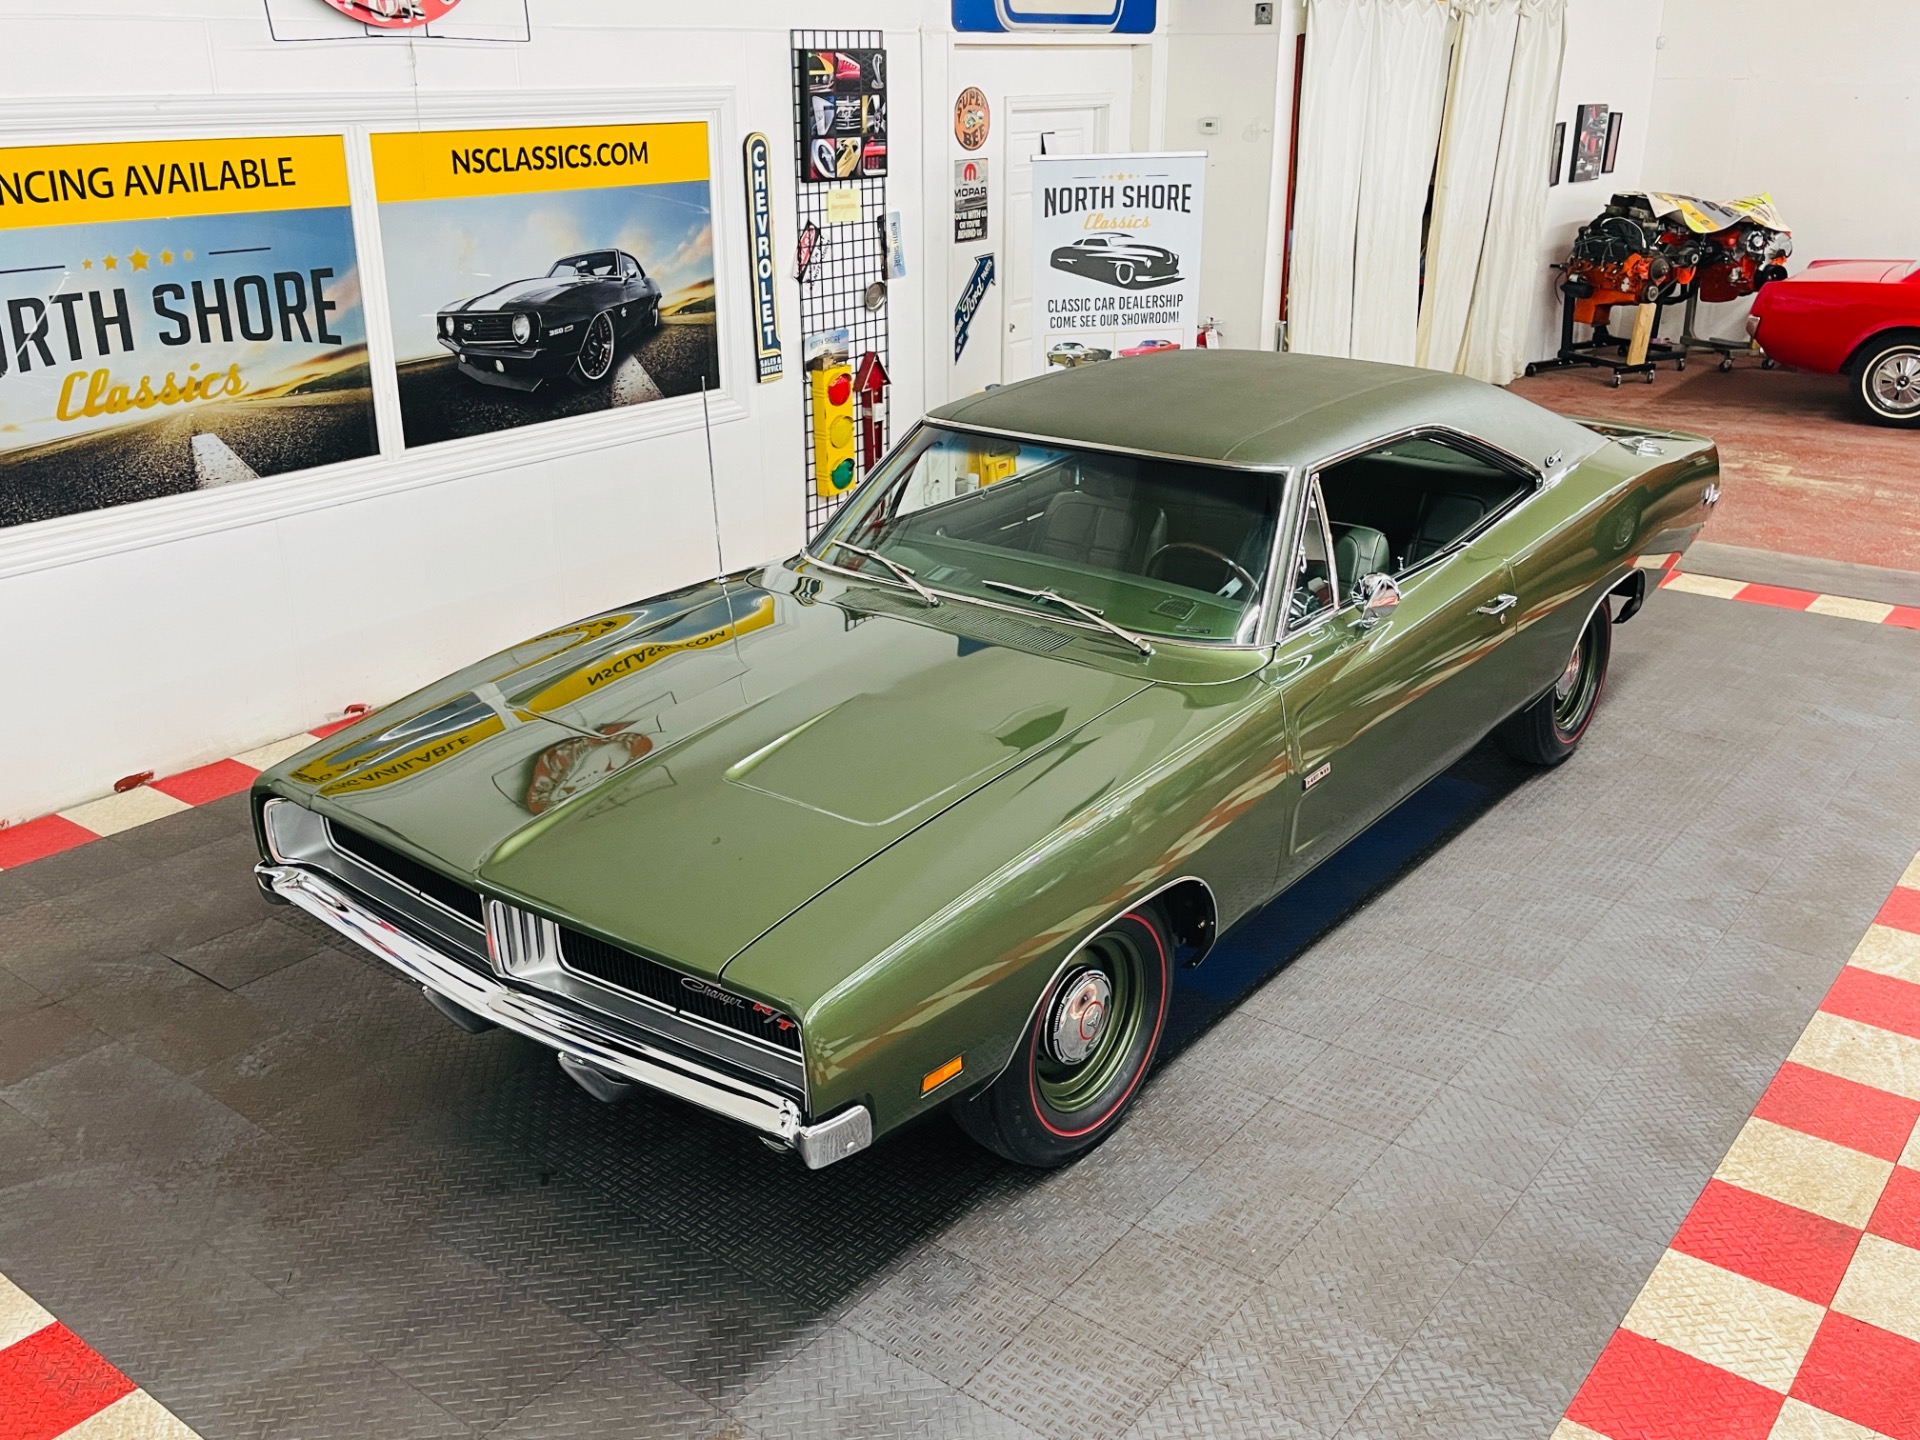 Used 1969 Dodge Charger - R/T - 426 HEMI - 4 SPEED MANUAL - CONCOURSE  QUALITY - SEE VIDEO - For Sale (Sold) | North Shore Classics Stock #69582CB